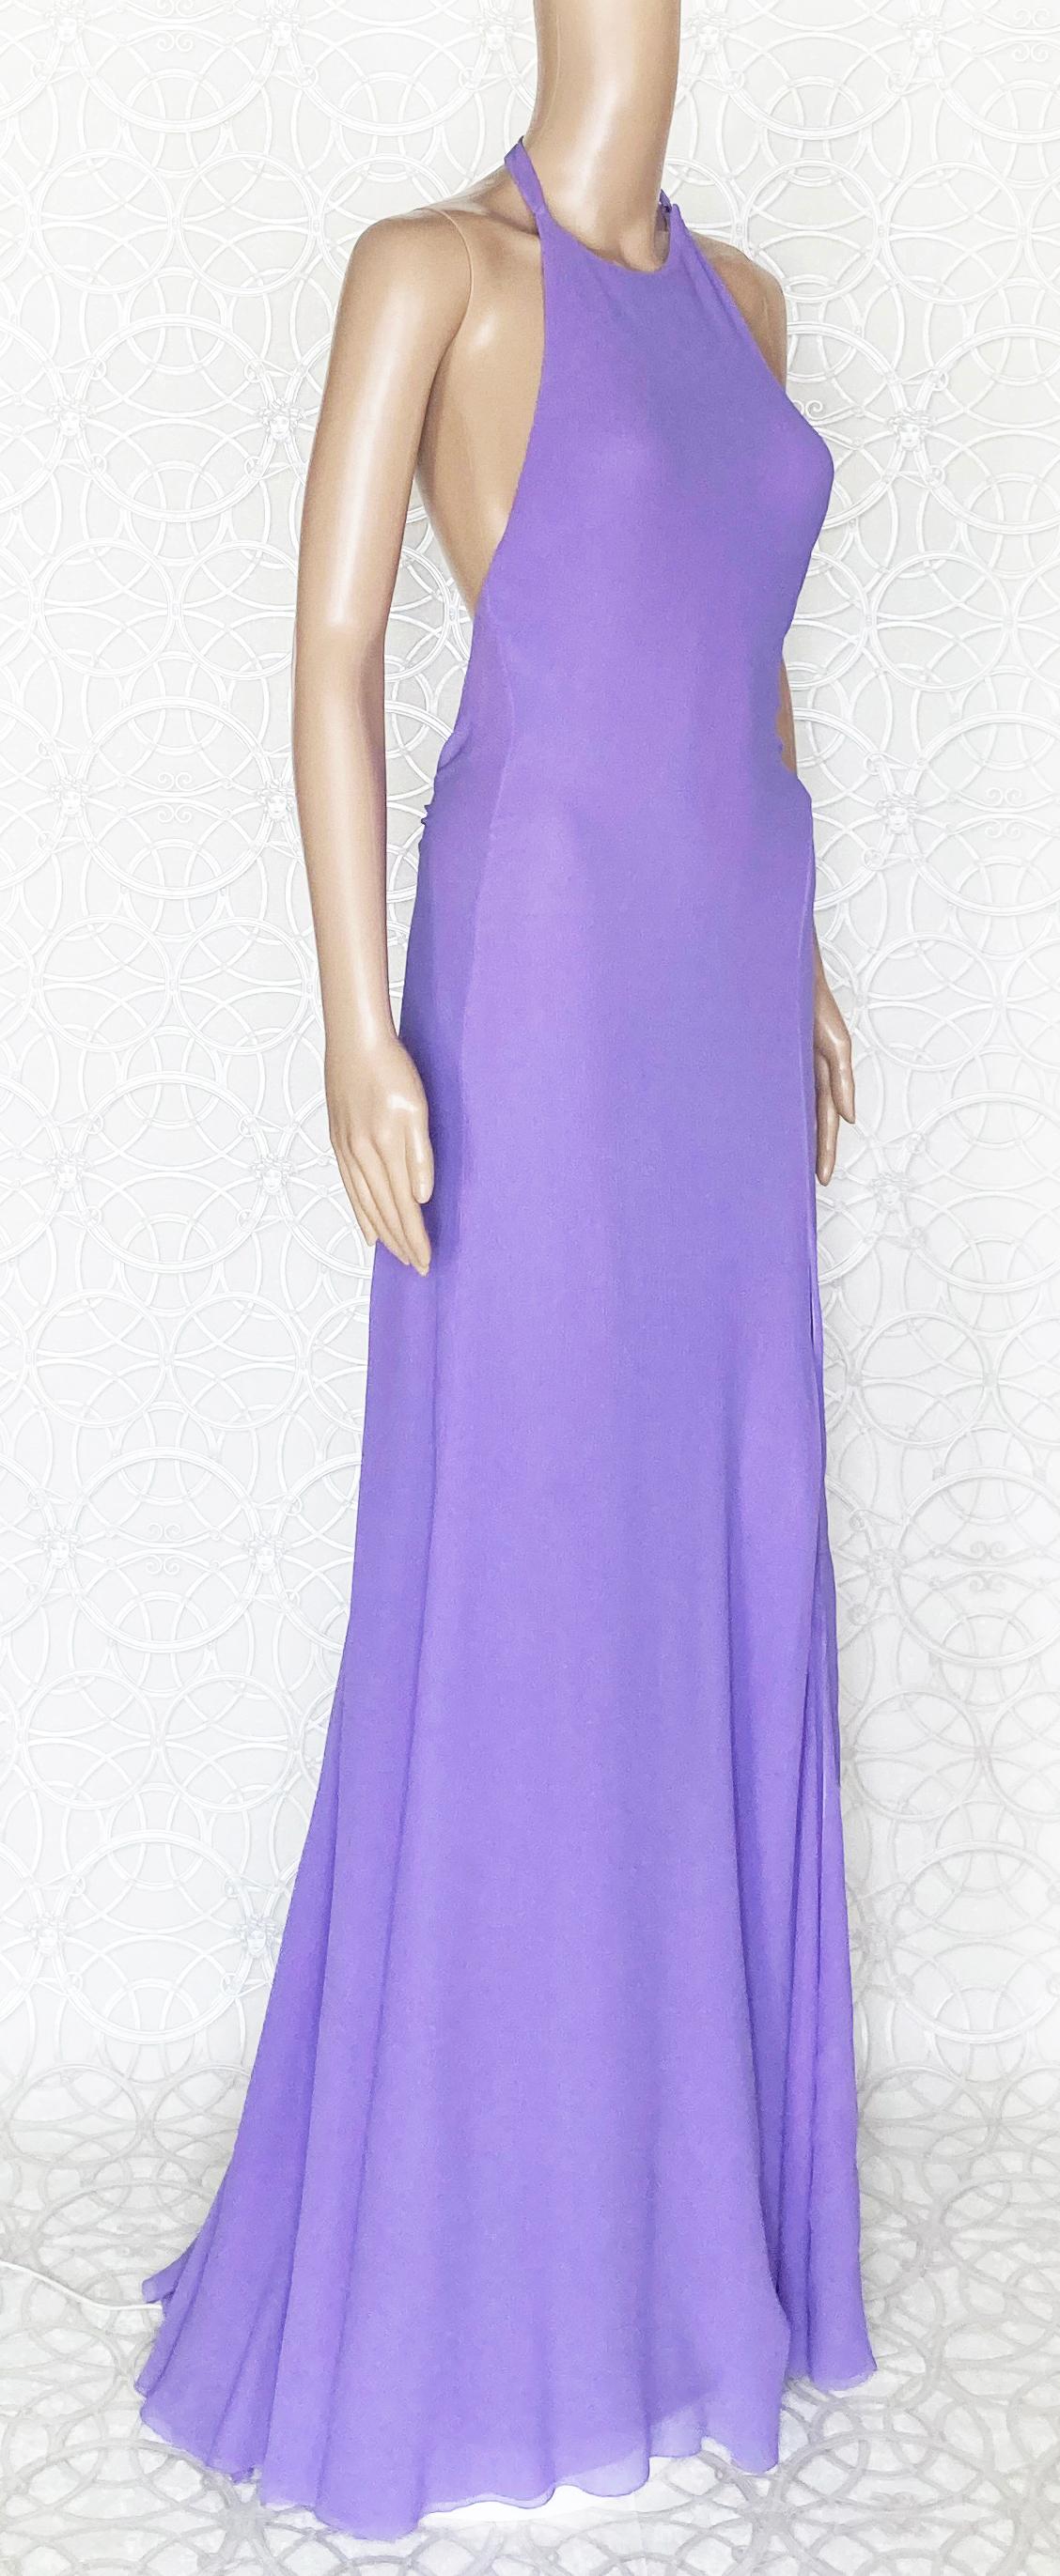 VINTAGE GIANNI VERSACE COUTURE OPEN BACK LILAC SILK DRESS Size 42 - 6 9